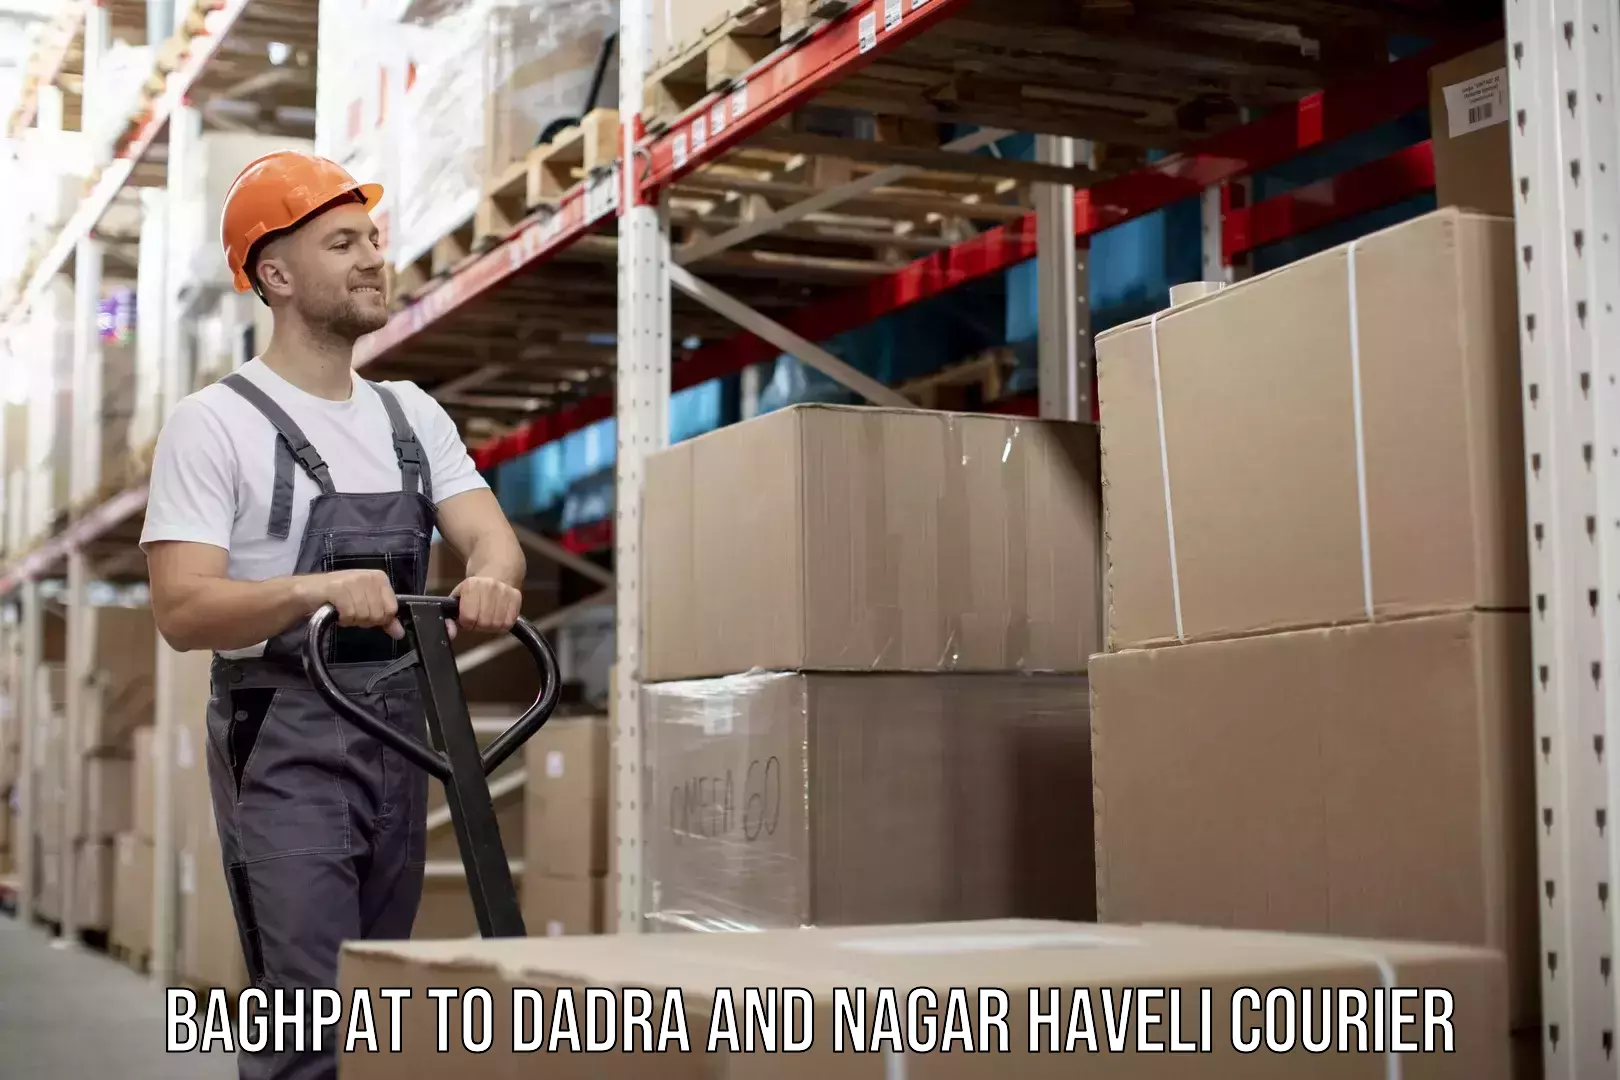 Automated parcel services Baghpat to Dadra and Nagar Haveli